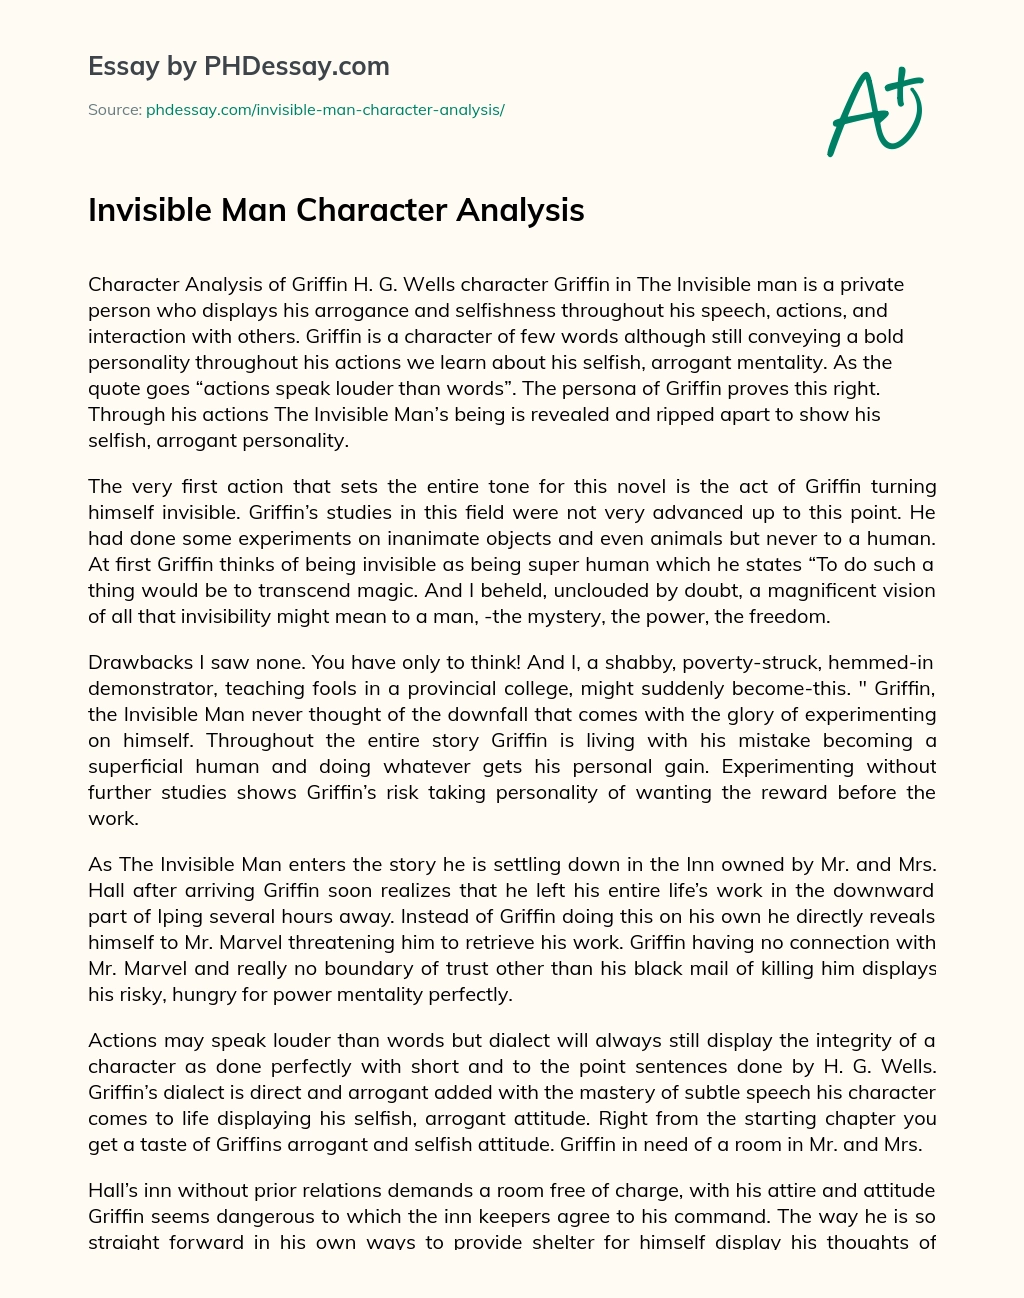 Invisible Man Character Analysis essay